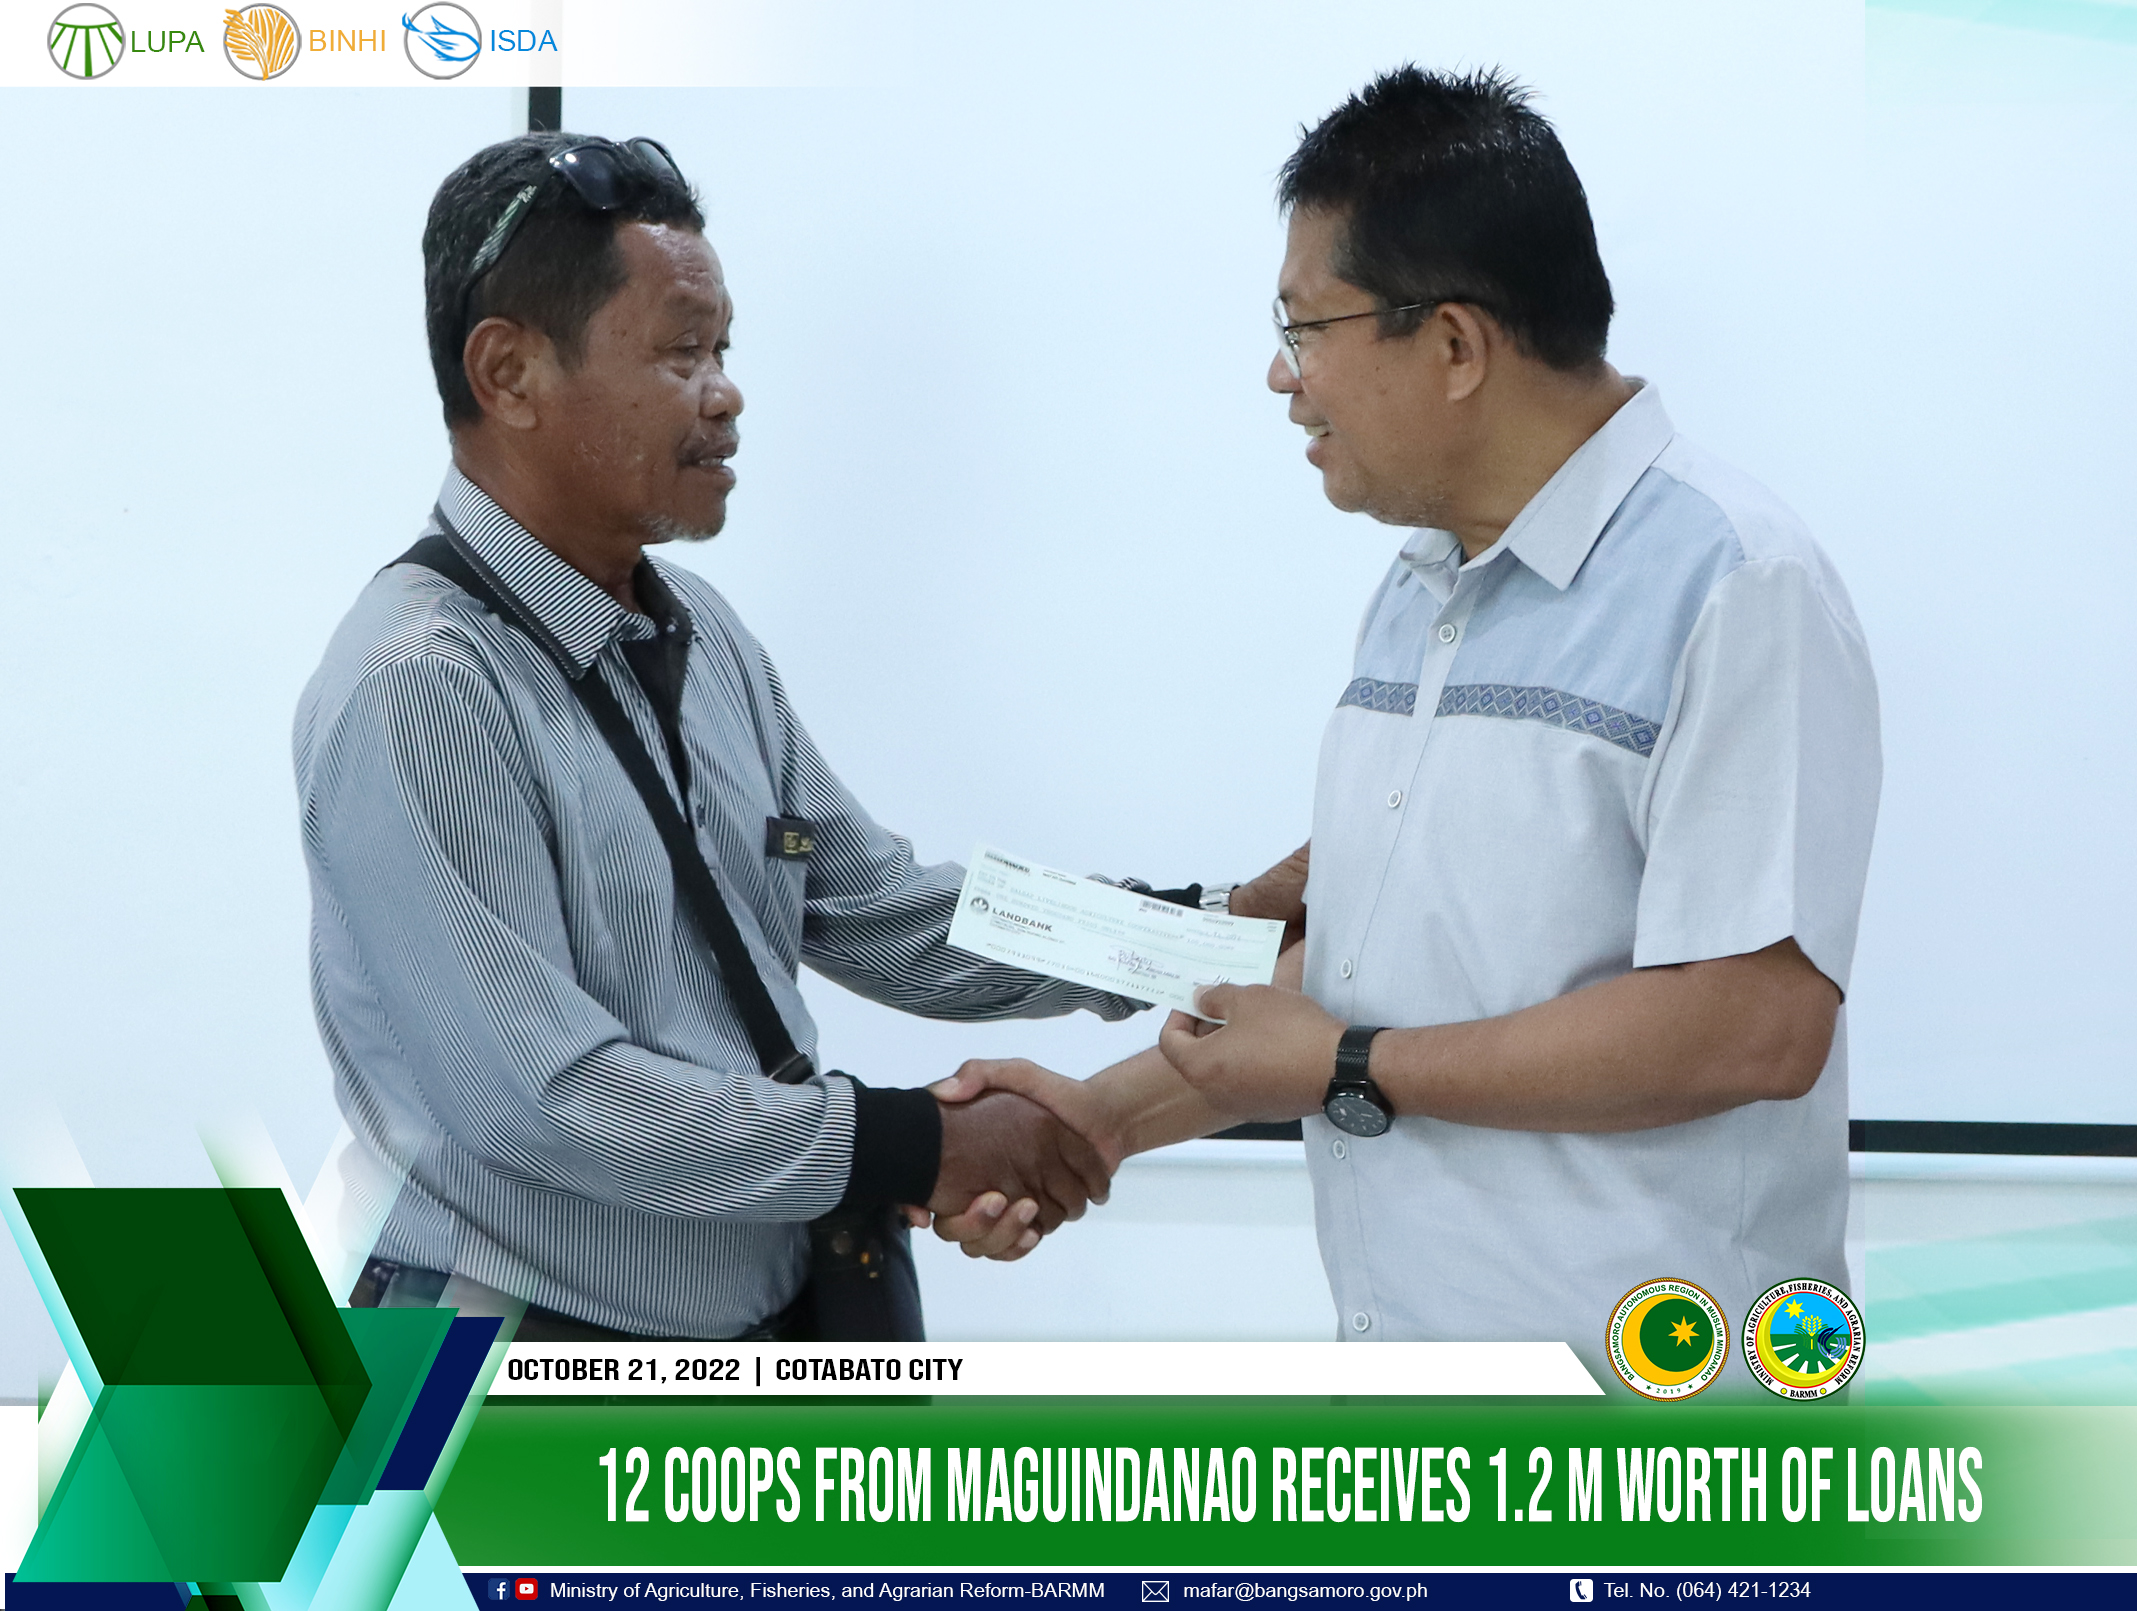 12 coops from Maguindanao receives 1.2 M worth of Loans